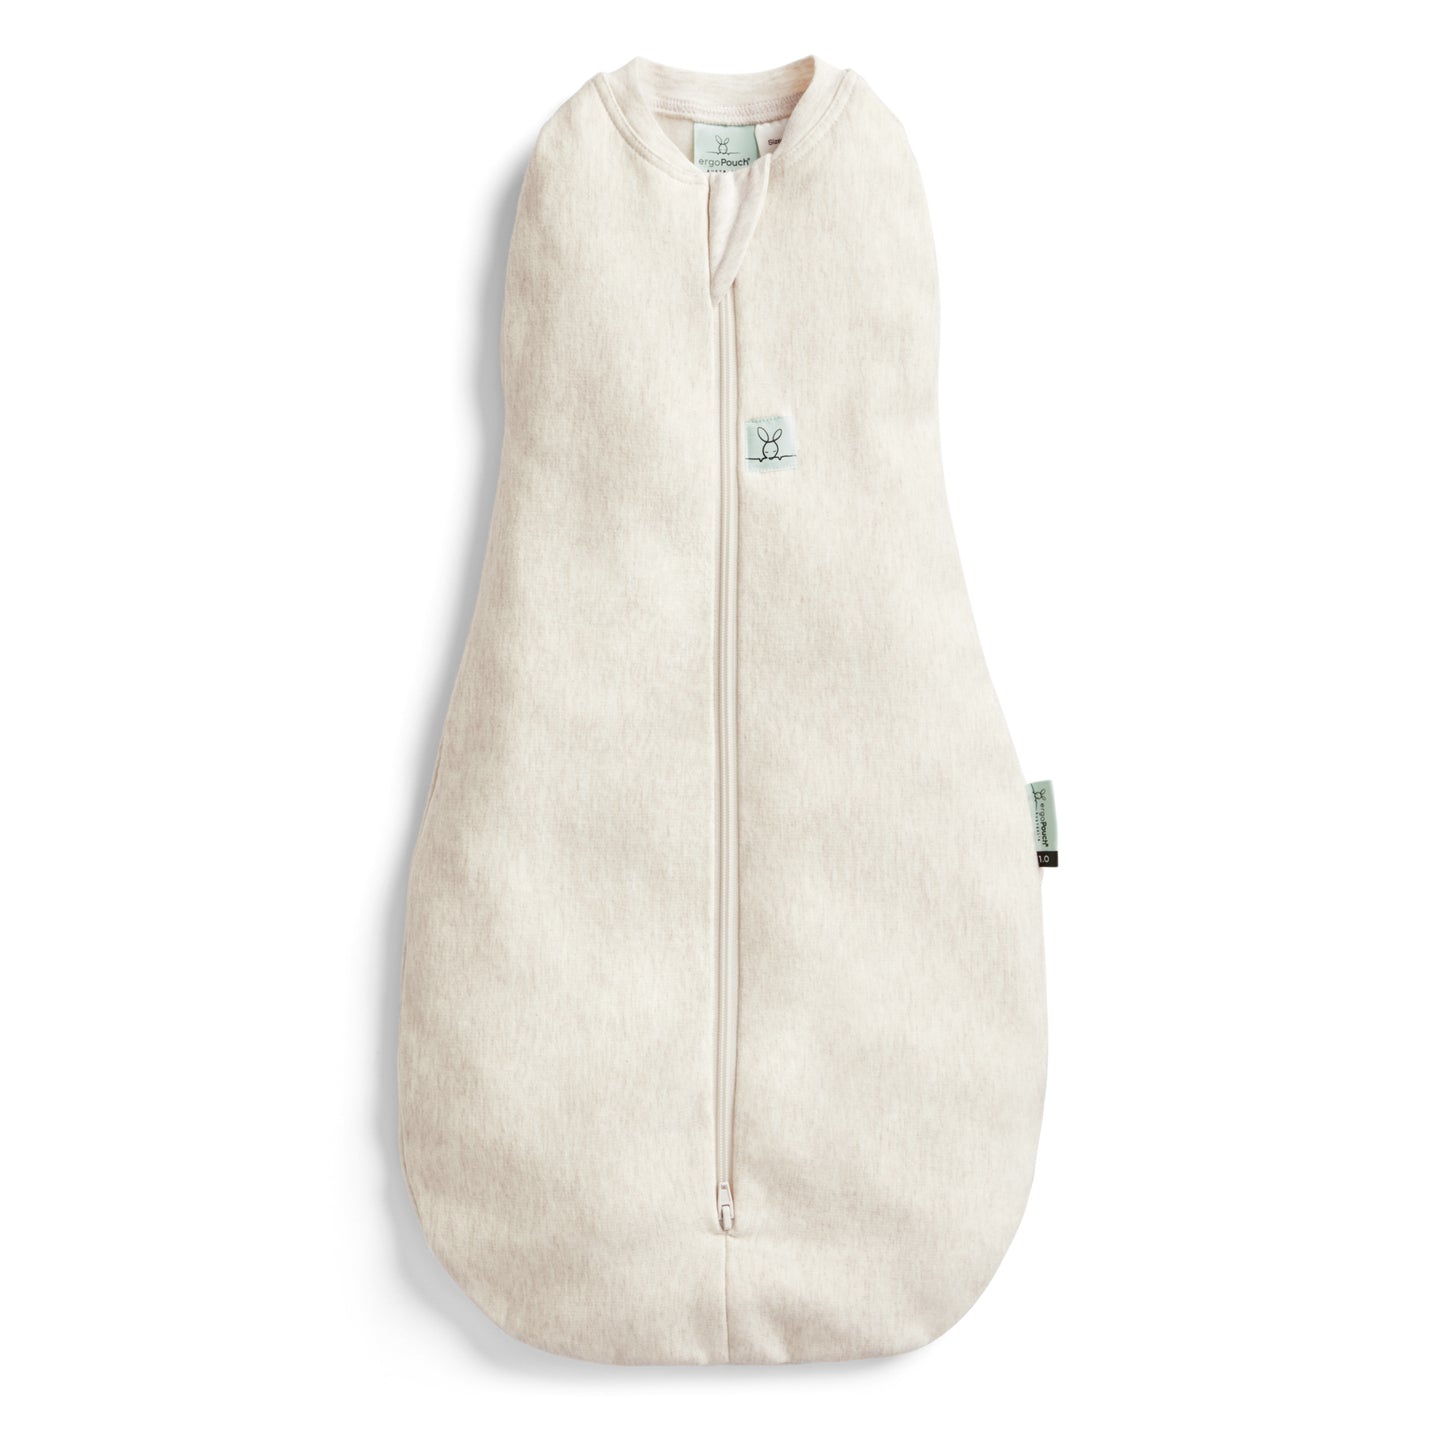 Cocoon Swaddle Bag 1.0 Tog, Oatmeal Marle- 3-6 months